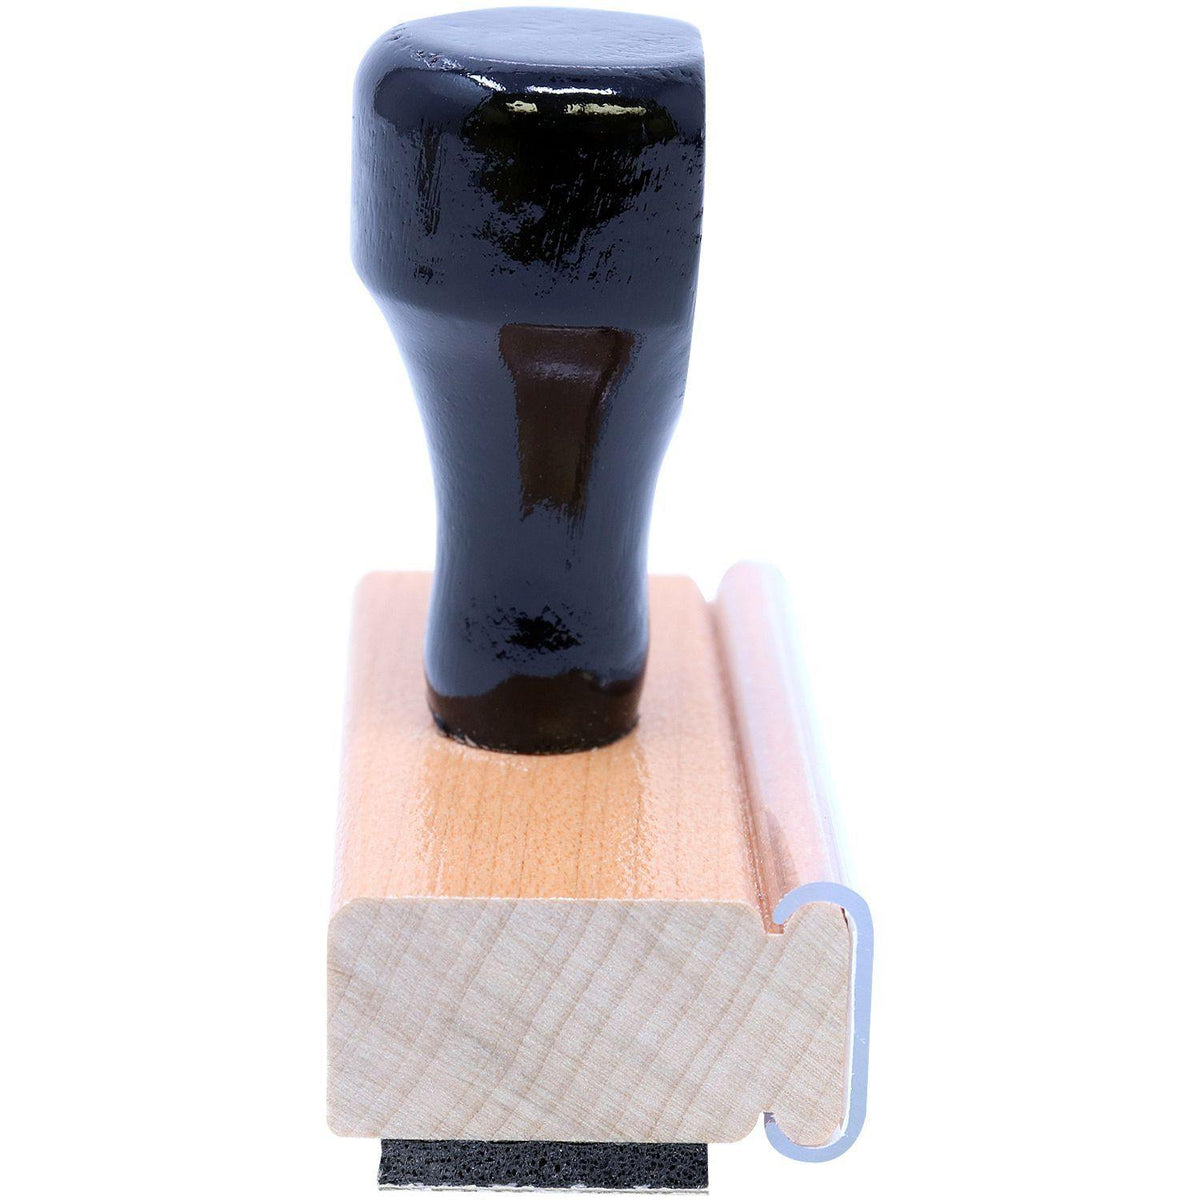 Round Void Rubber Stamp - Engineer Seal Stamps - Brand_Acorn, Impression Size_Small, Stamp Type_Regular Stamp, Type of Use_General